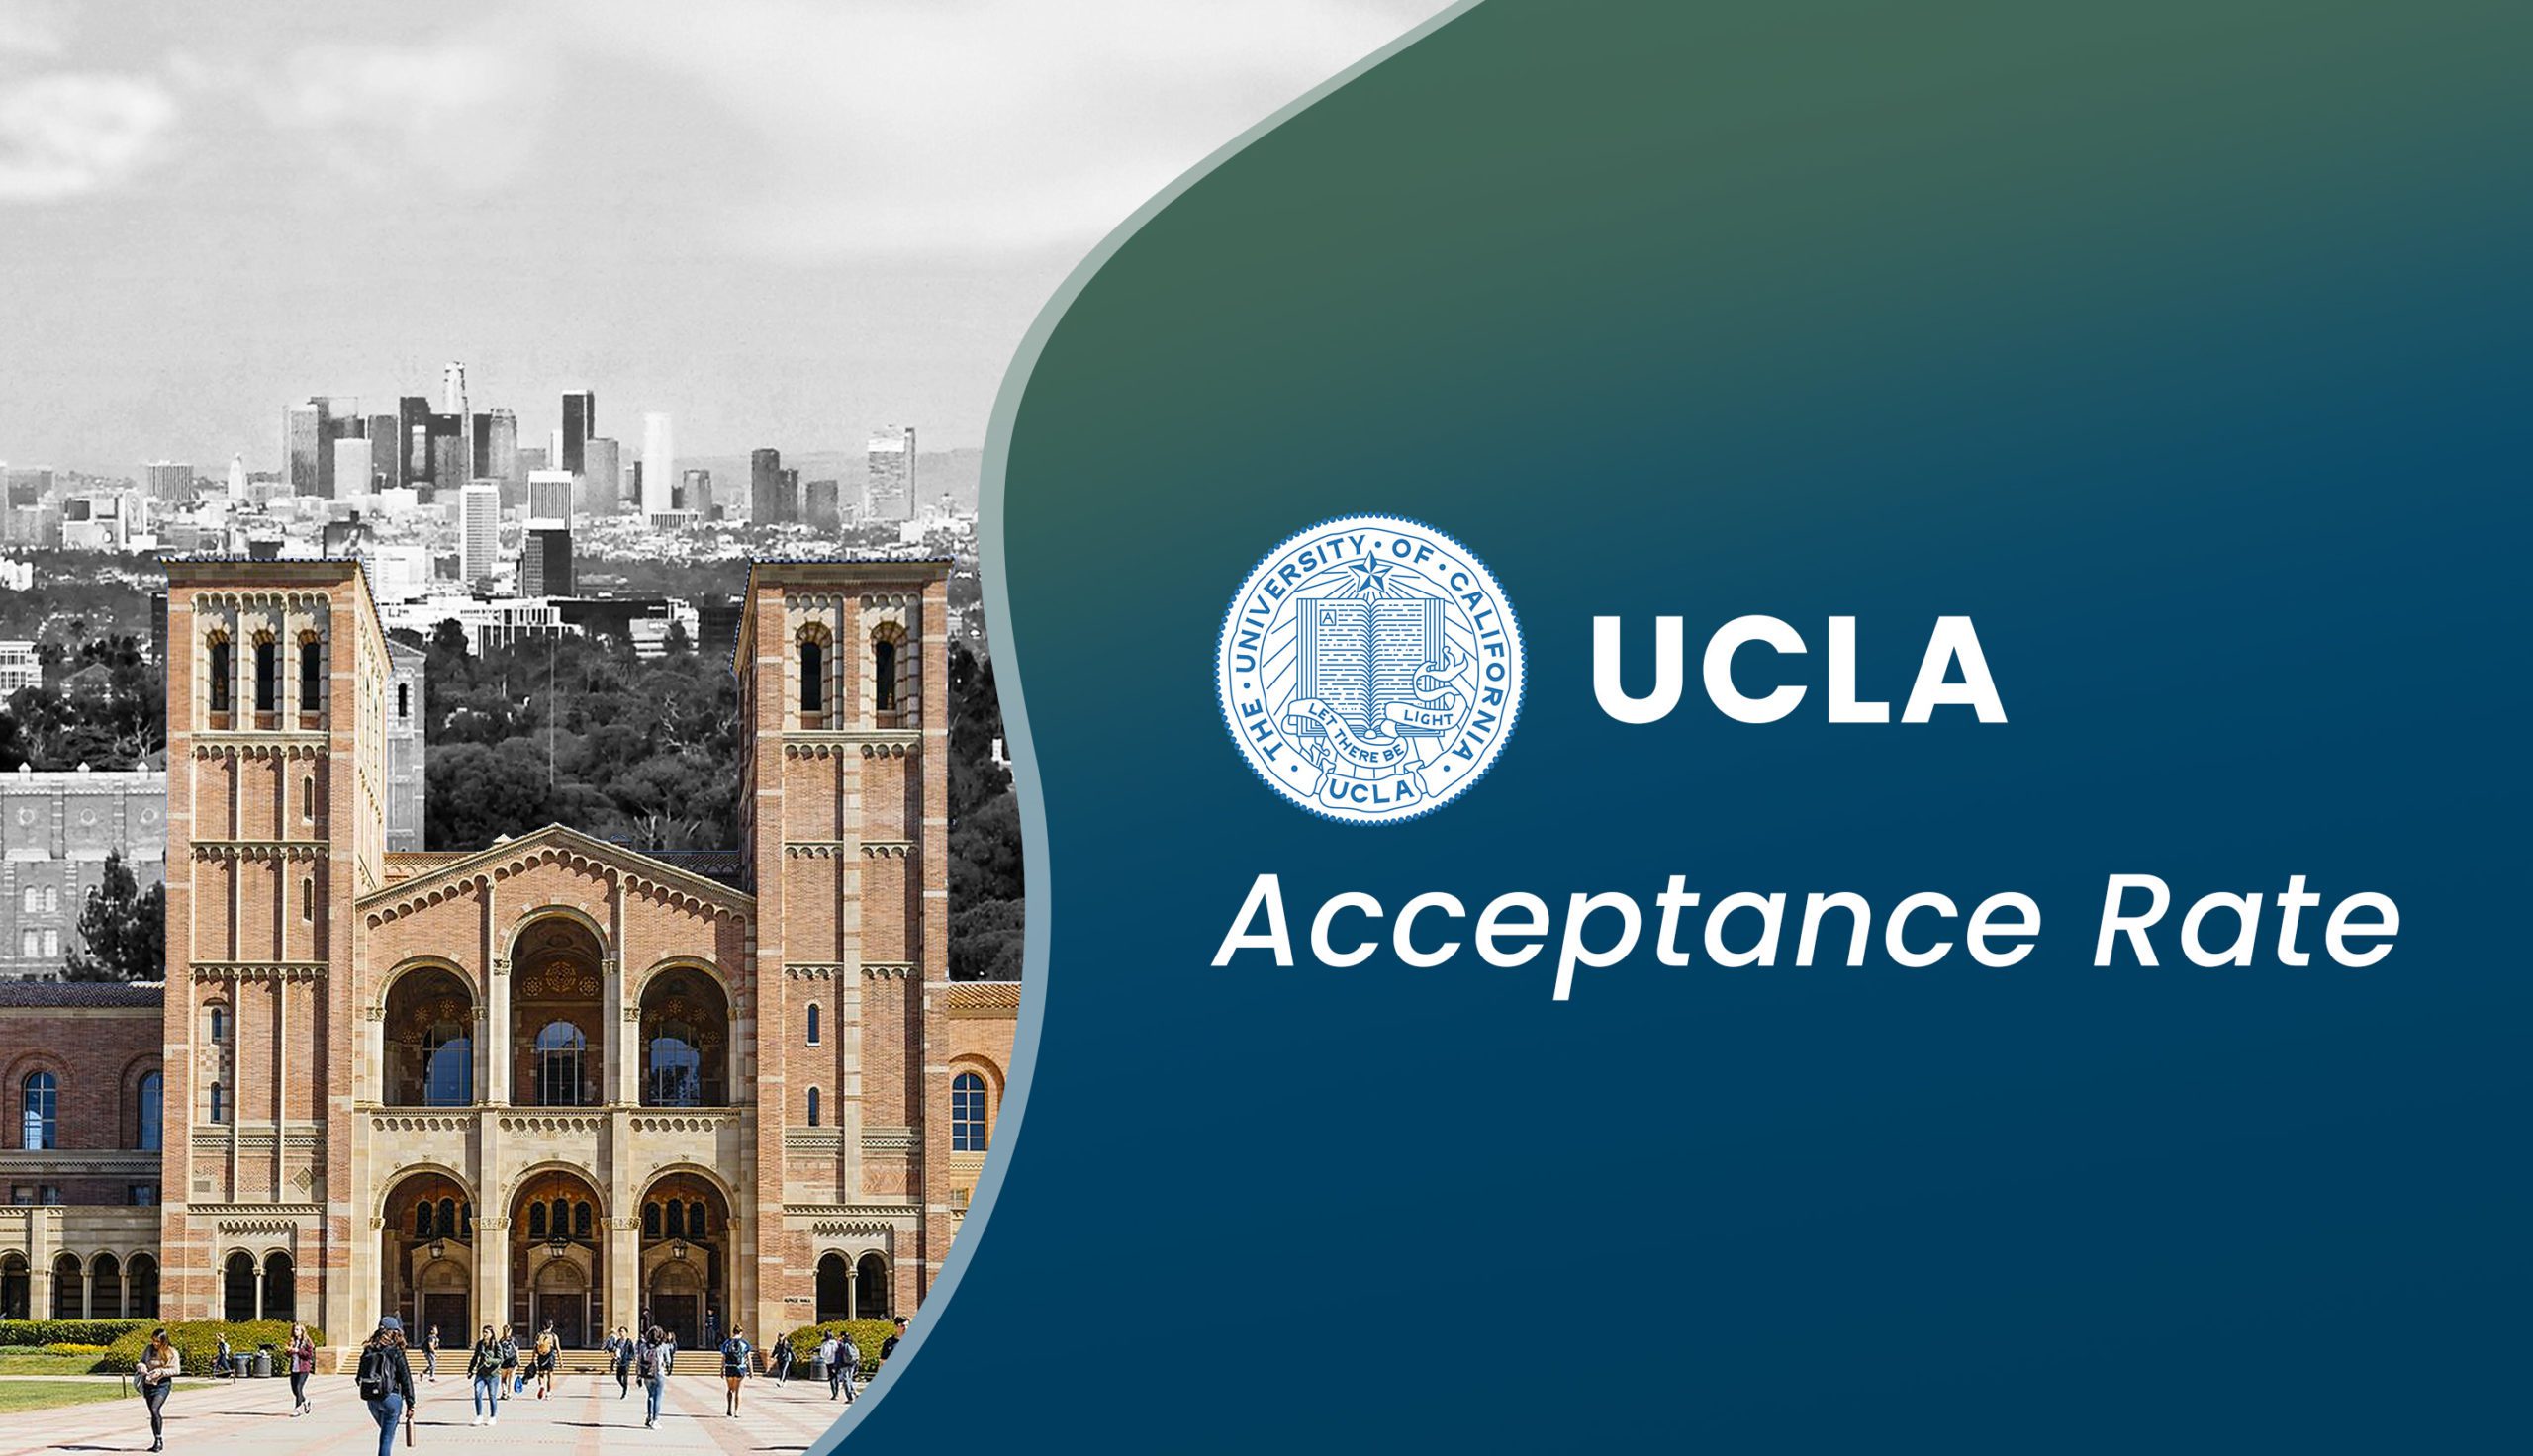 UCLA Acceptance Rate & UCLA Admissions Expert Guide